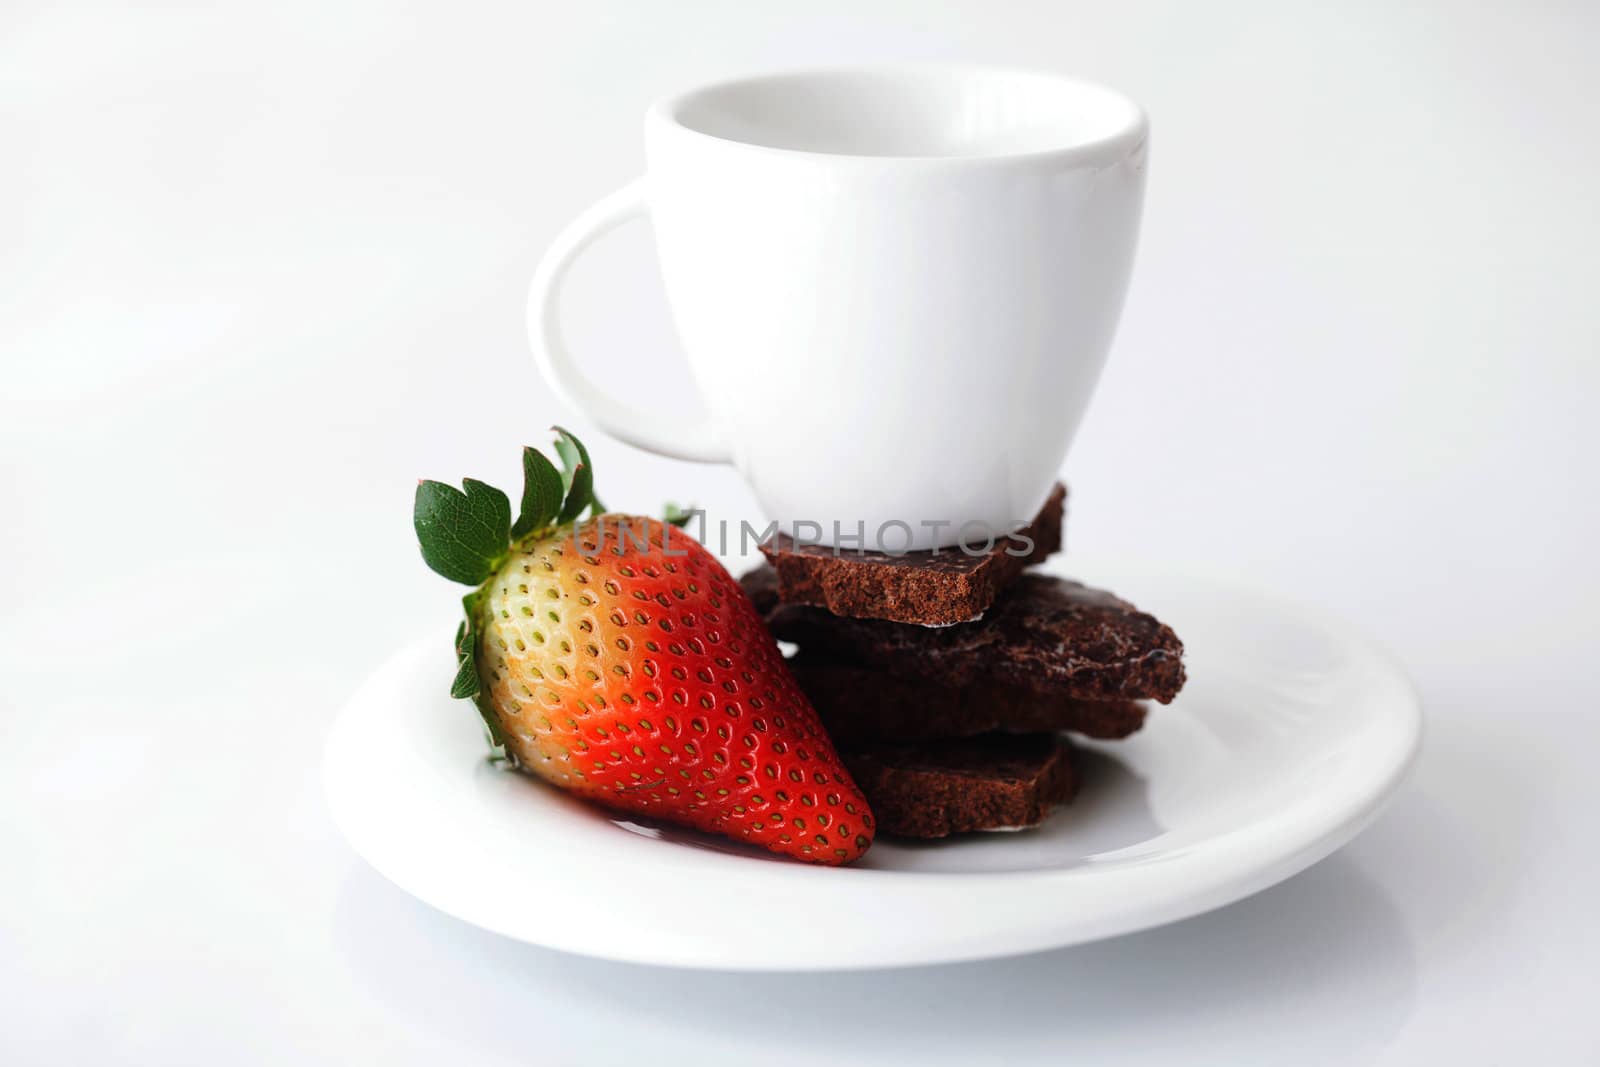 white cup with saucer, chocolate and strawberry by jannyjus